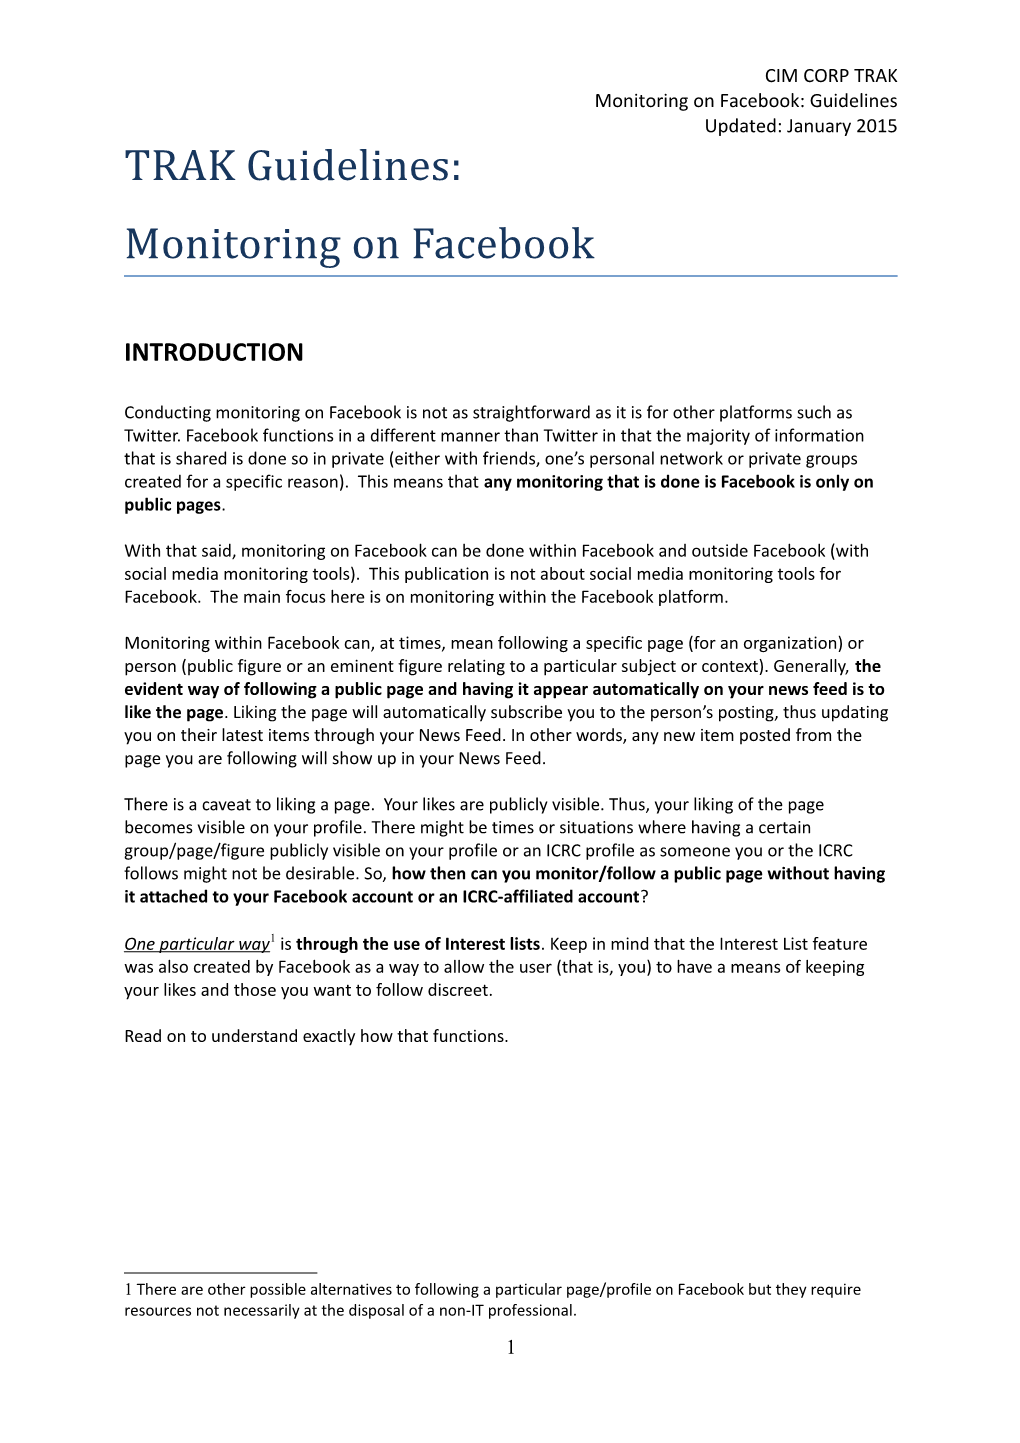 Monitoring on Facebook: Guidelines